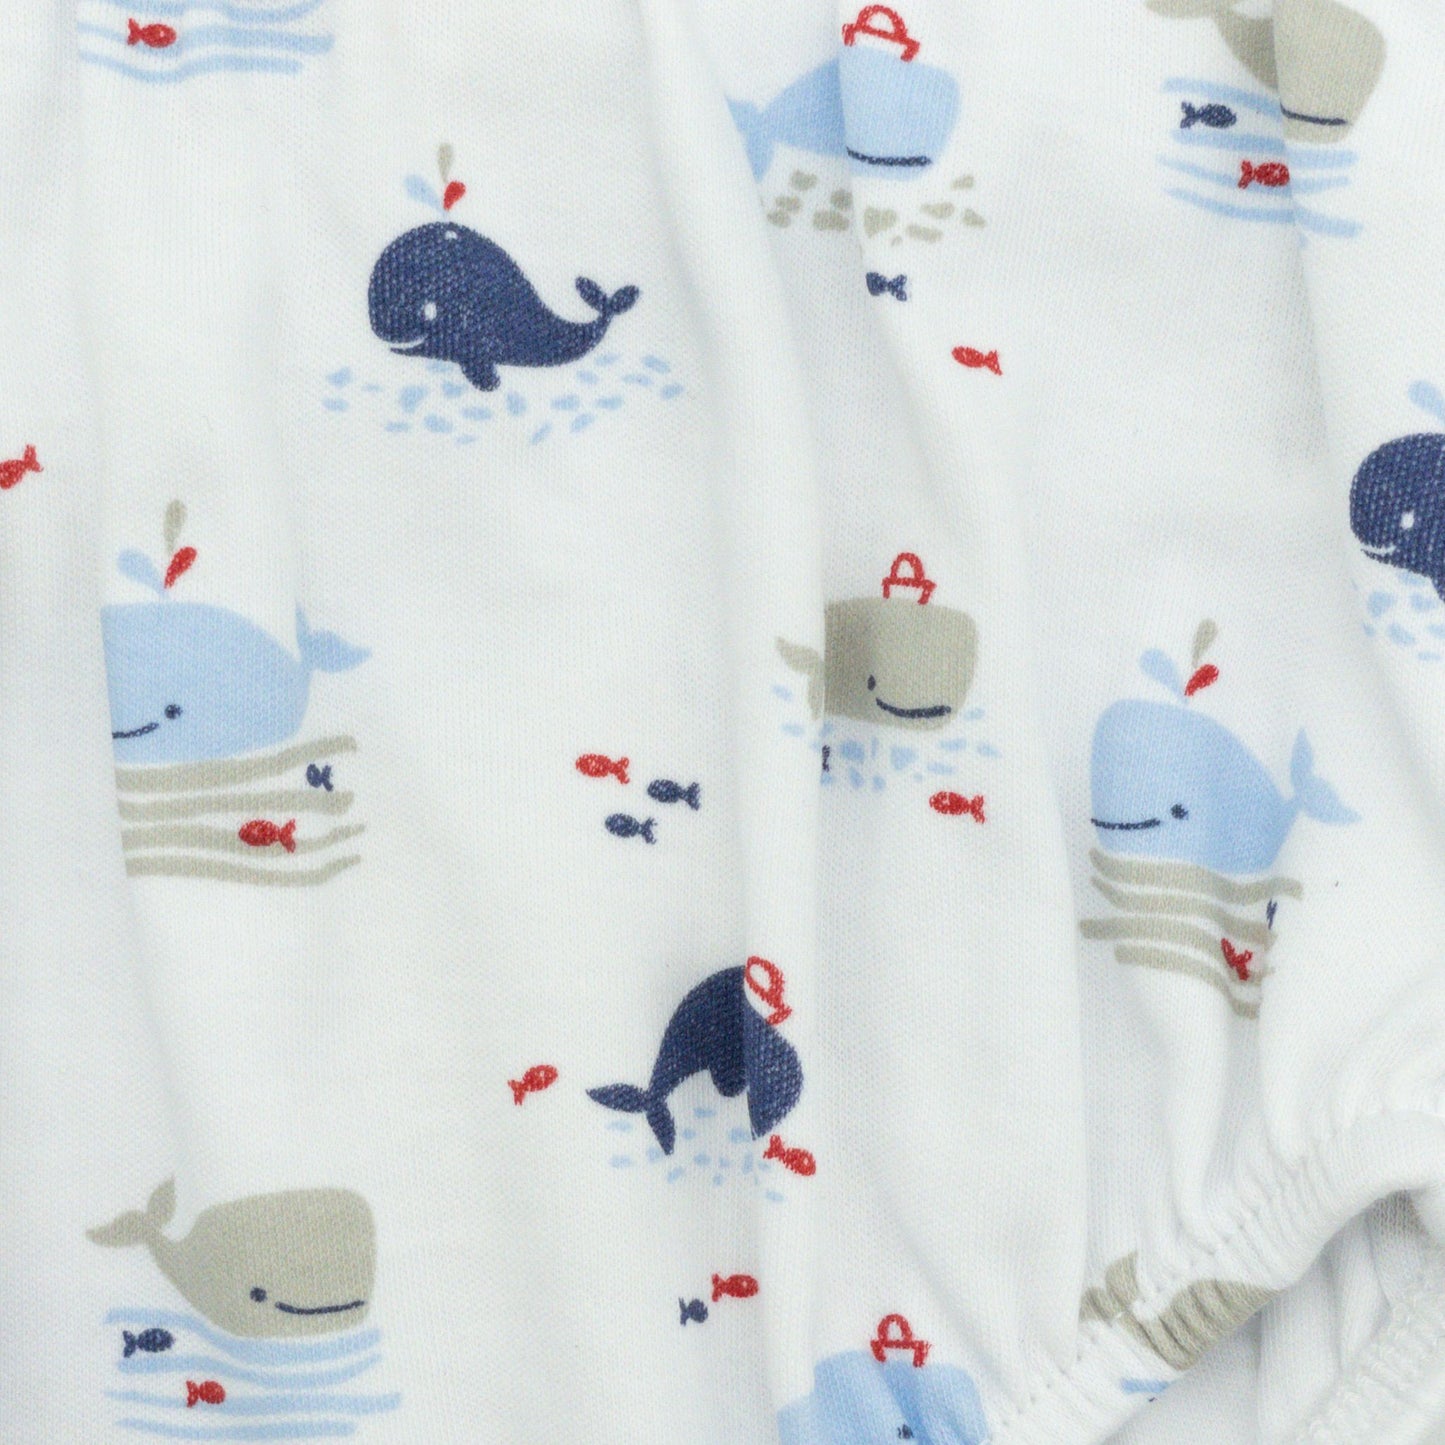 Embroidered Whale Diaper Shirt Set